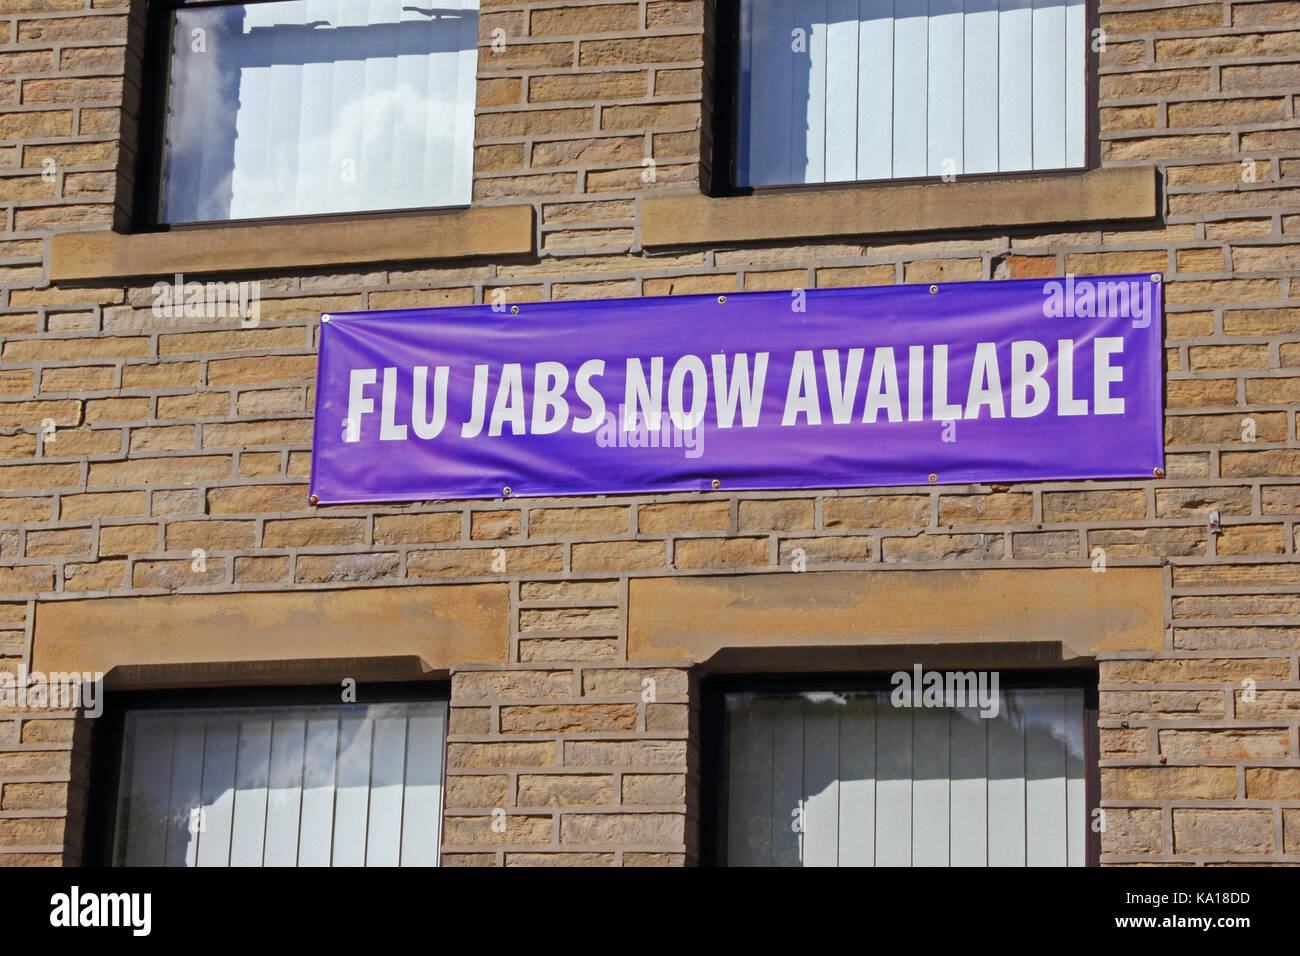 Flu Jabs Now Available, sign on wall of Doctor's surgery Stock Photo